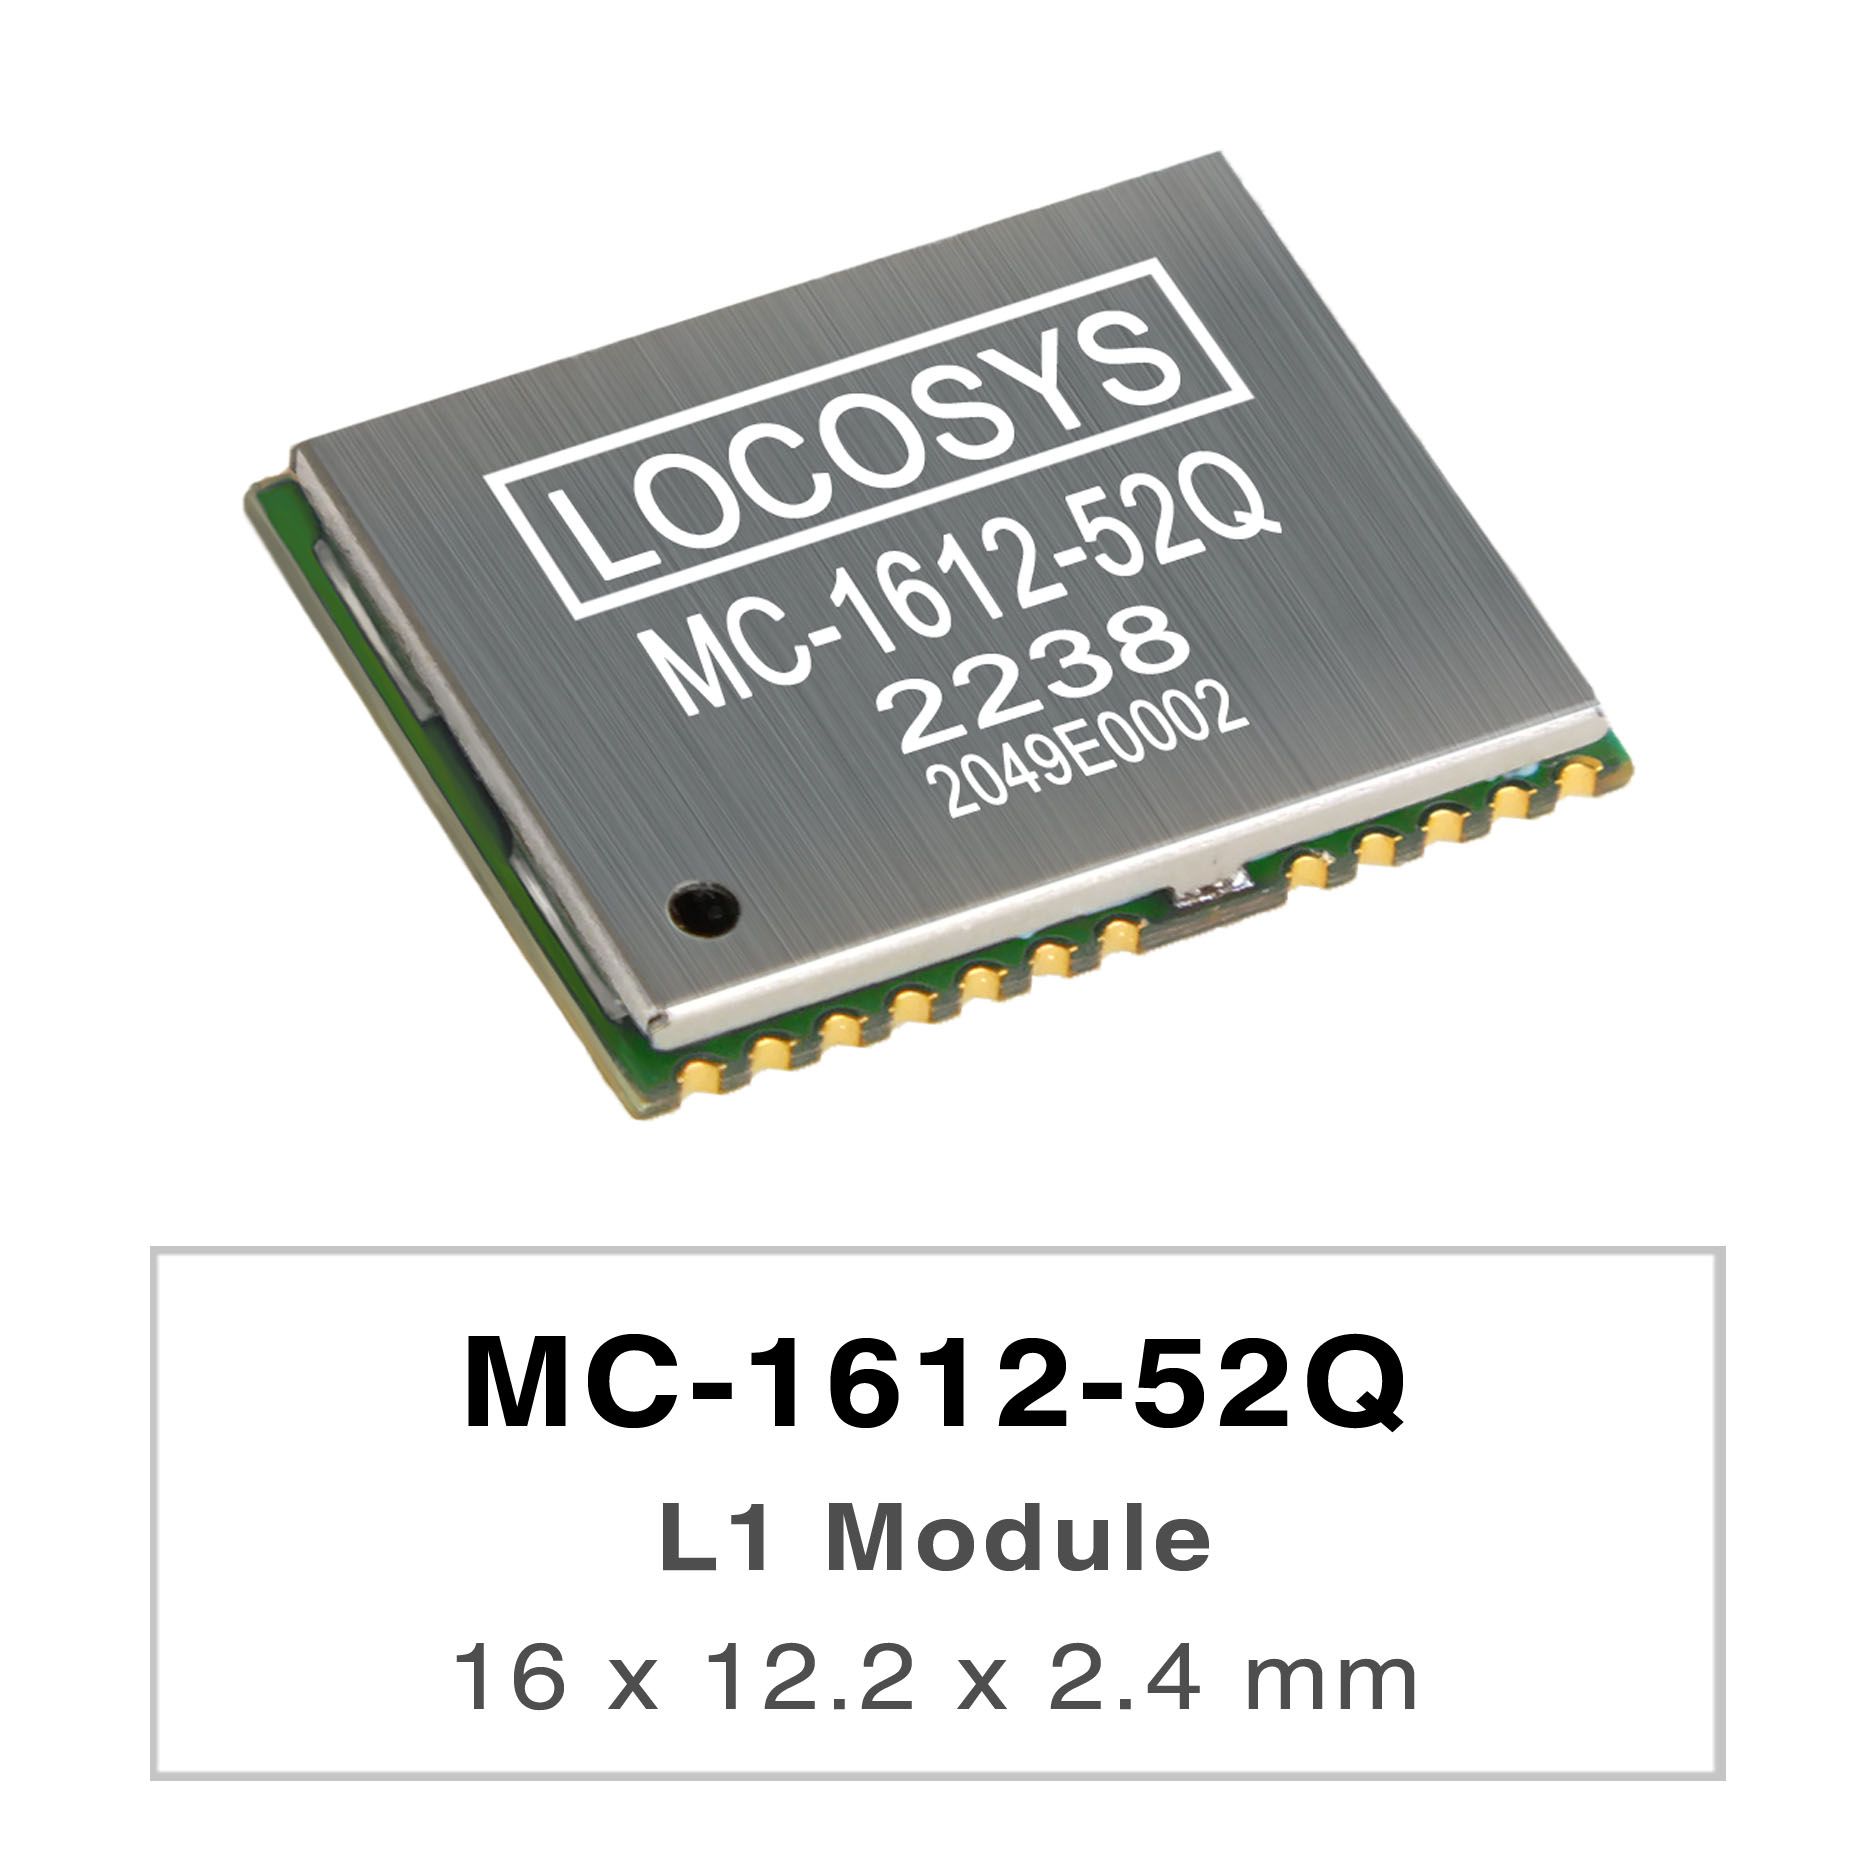 LOCOSYS MC-1612-52Q is a complete standalone GNSS module.